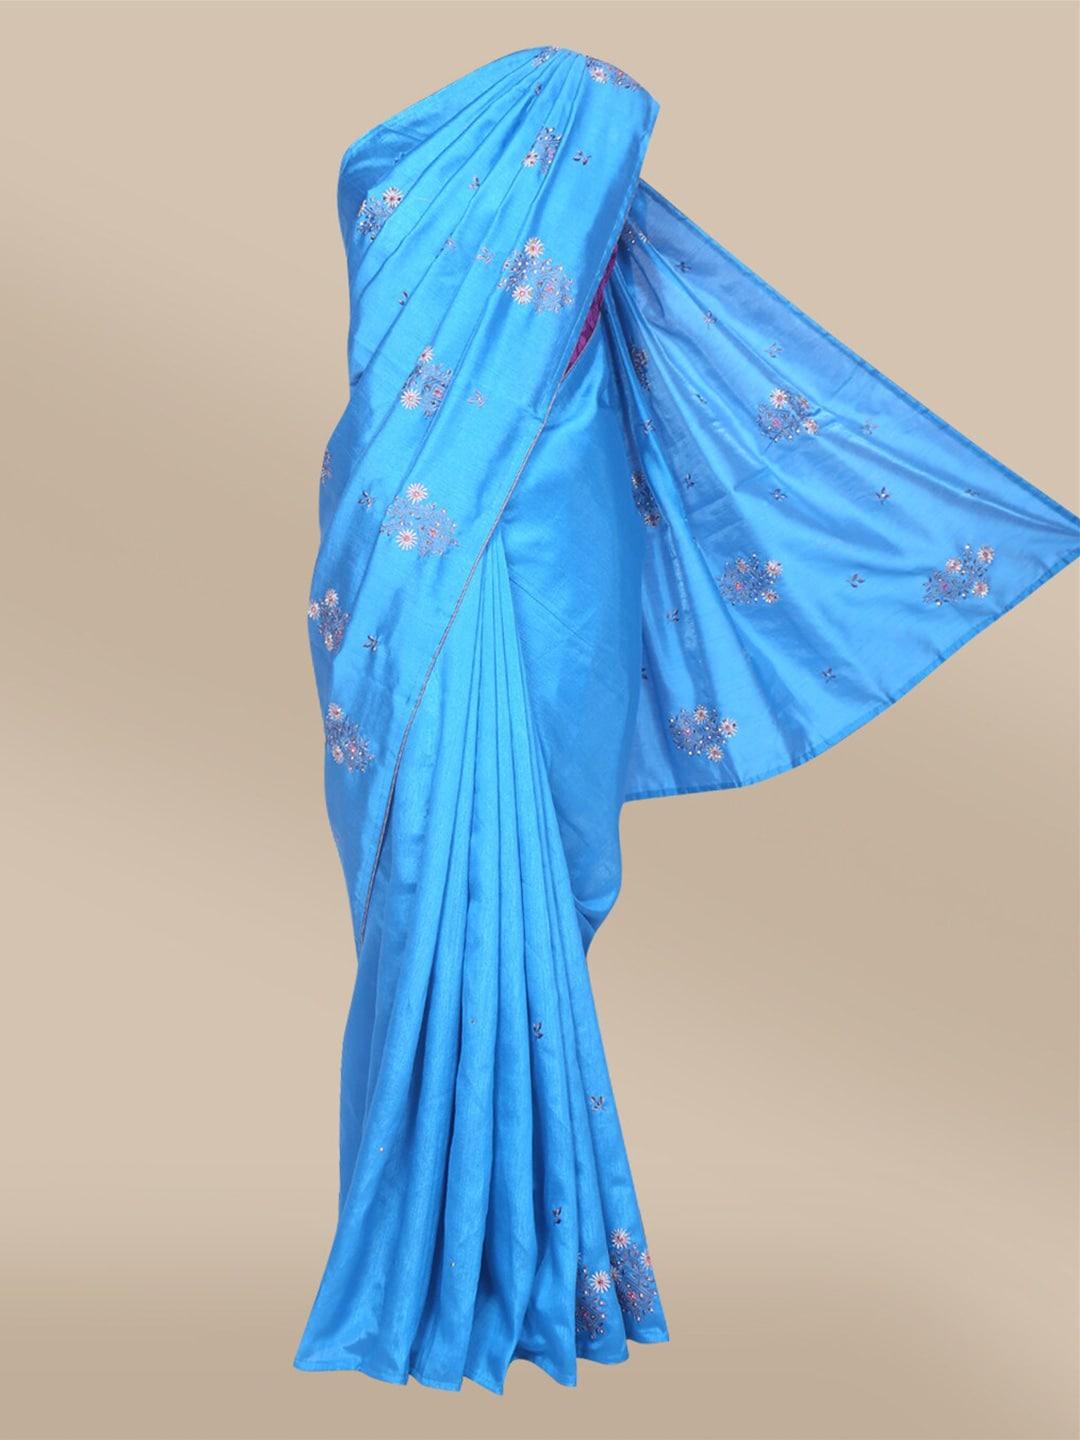 the-chennai-silks-blue-&-pink-floral-embroidered-saree